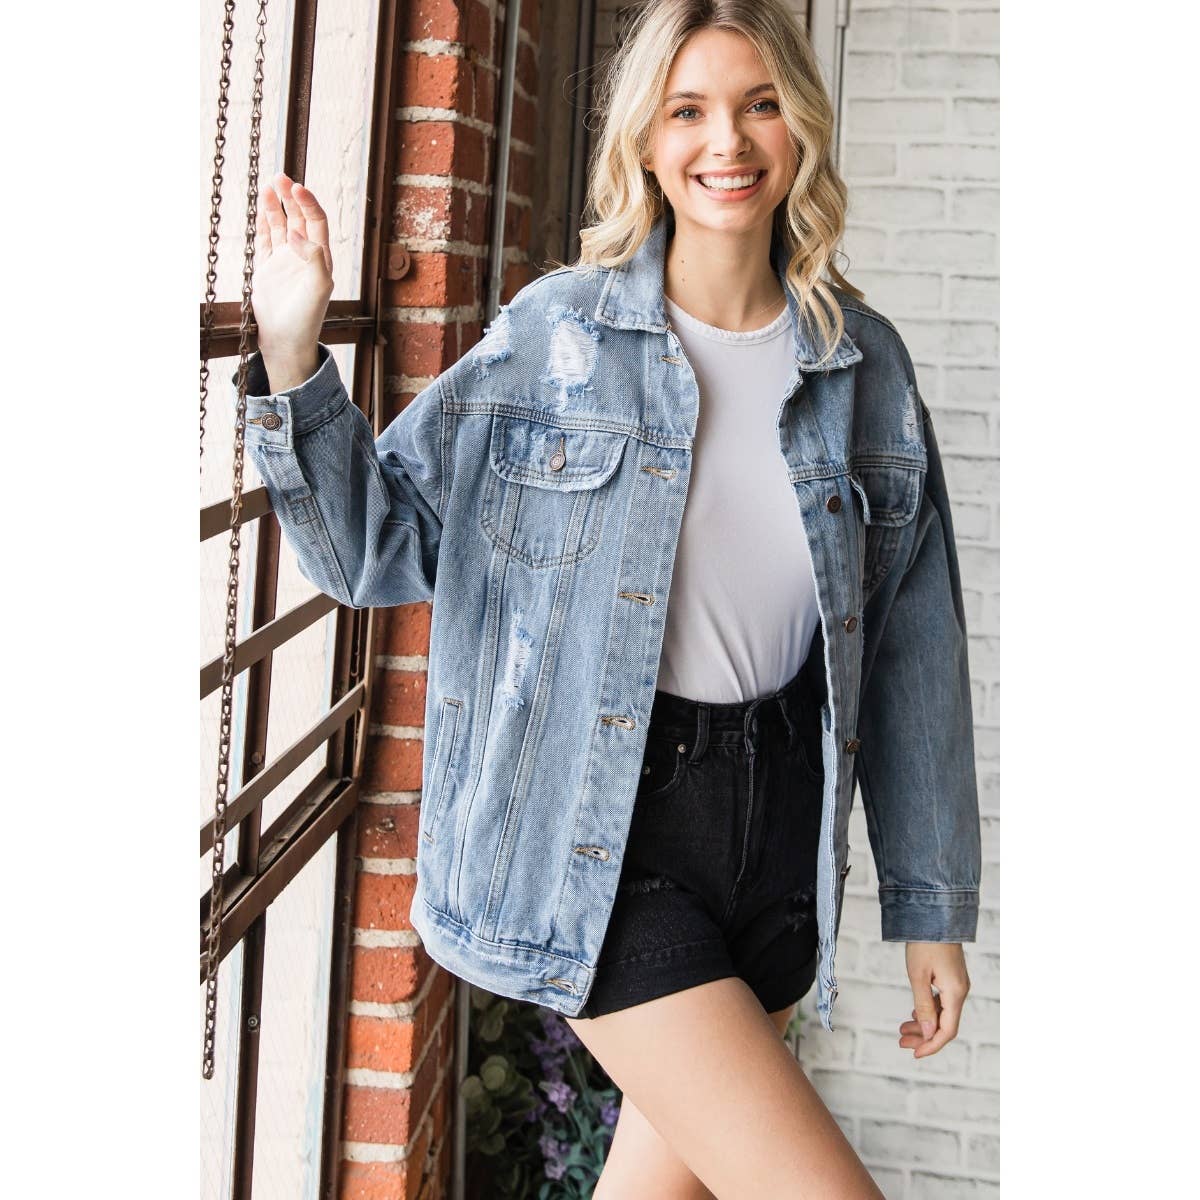 Wholesale Womens Korean Denim Denim Coat With Beading Detailing Loose Fit,  Long Sleeves, Large Size Fashionable Hole Jacket By Mori Girl From  Xiatian5, $26.78 | DHgate.Com